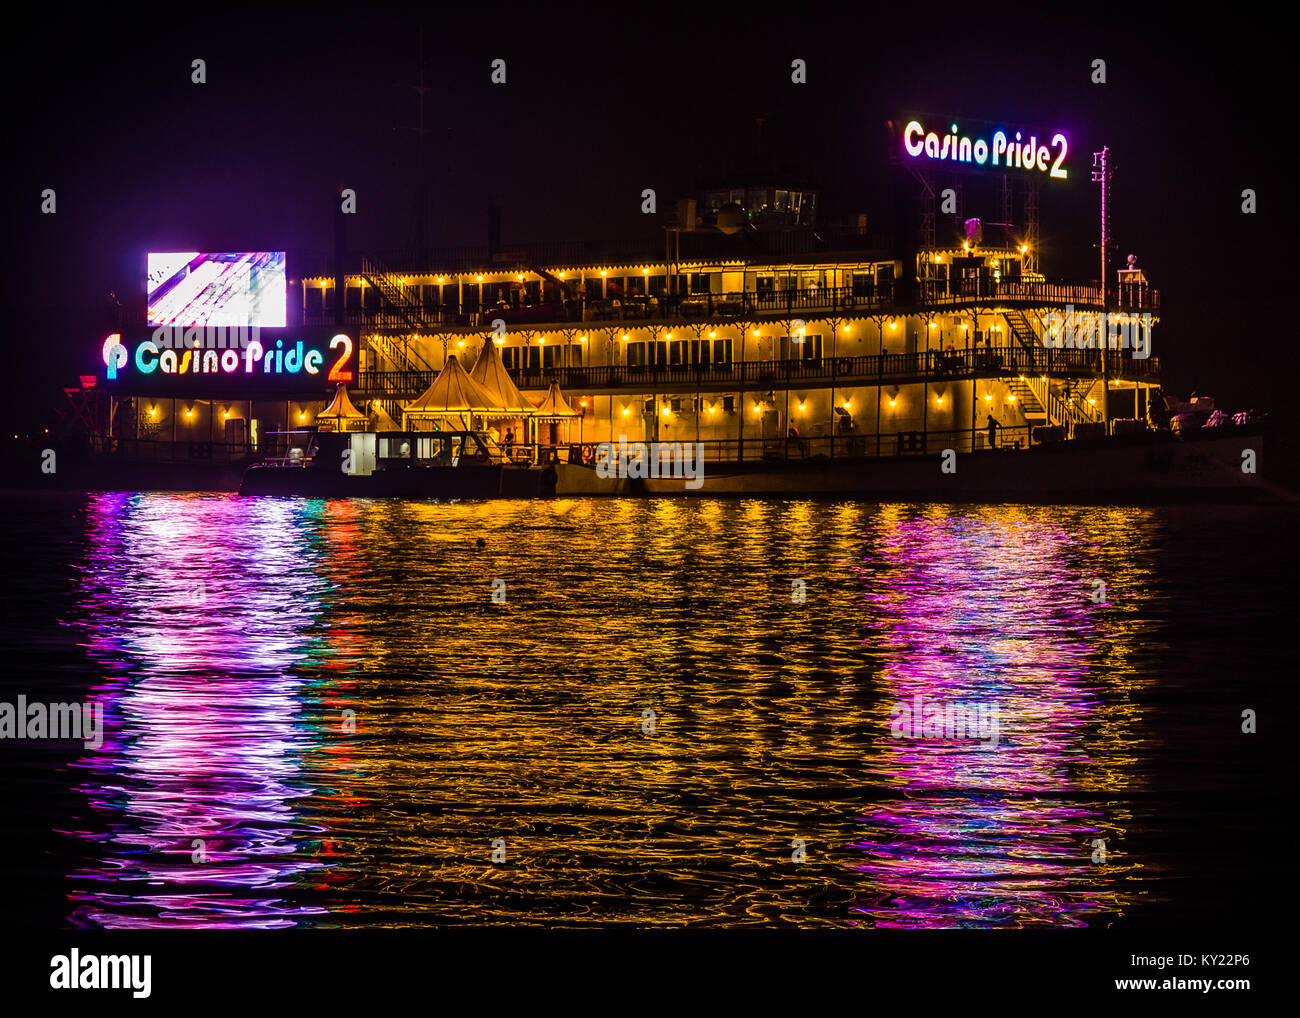 Nocturnal view of Casino Pride 2 (one of Goa's offshore Casinos operating in Mandovi River). Stock Photo